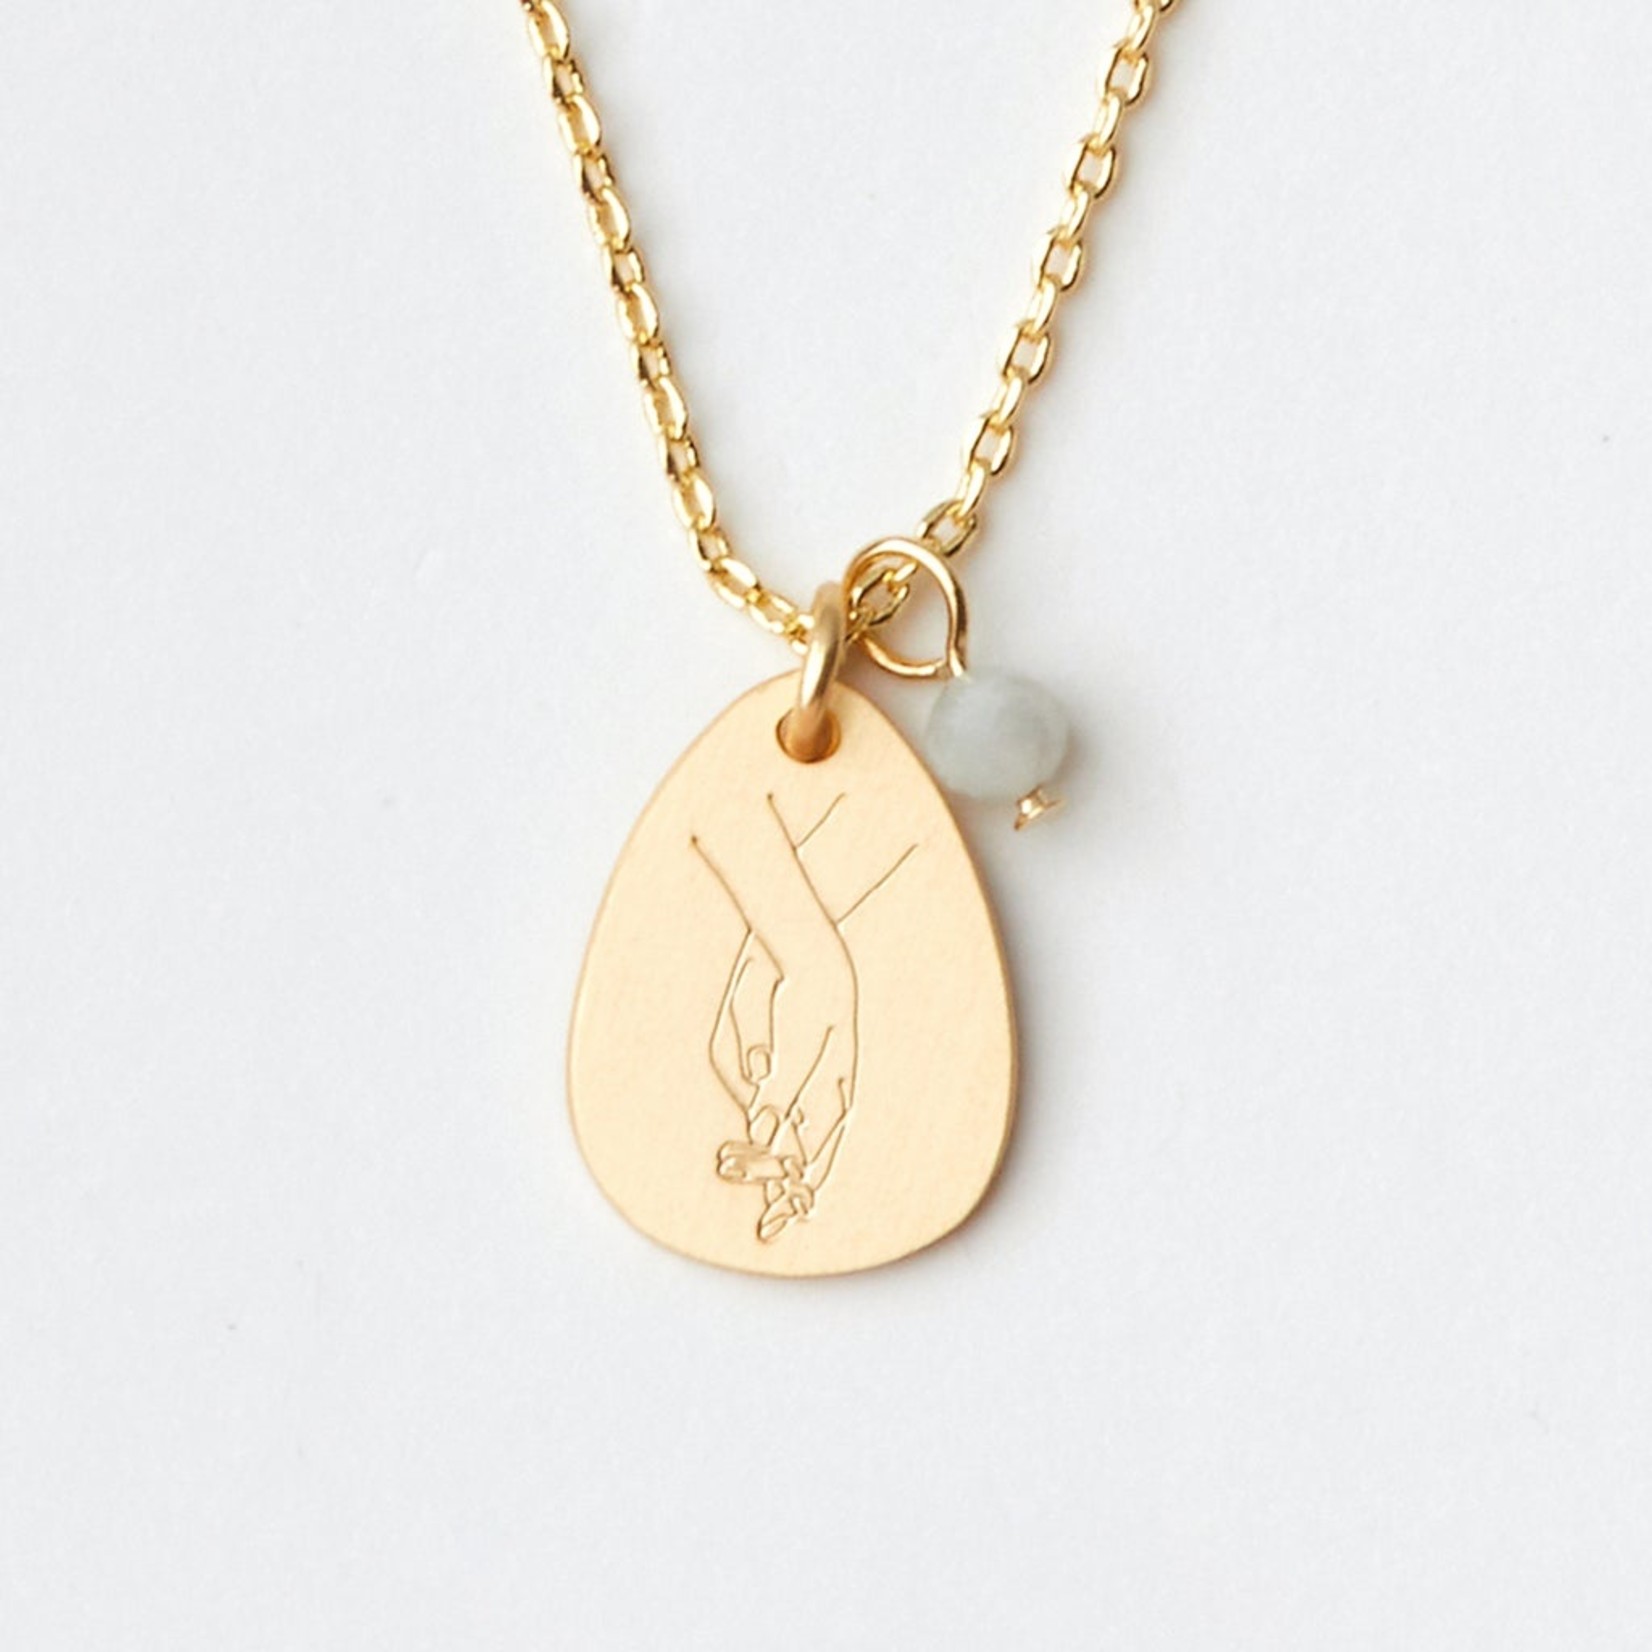 Scout Curated Wears Scout Curated Wears - Charm Necklace Amazonite Gold